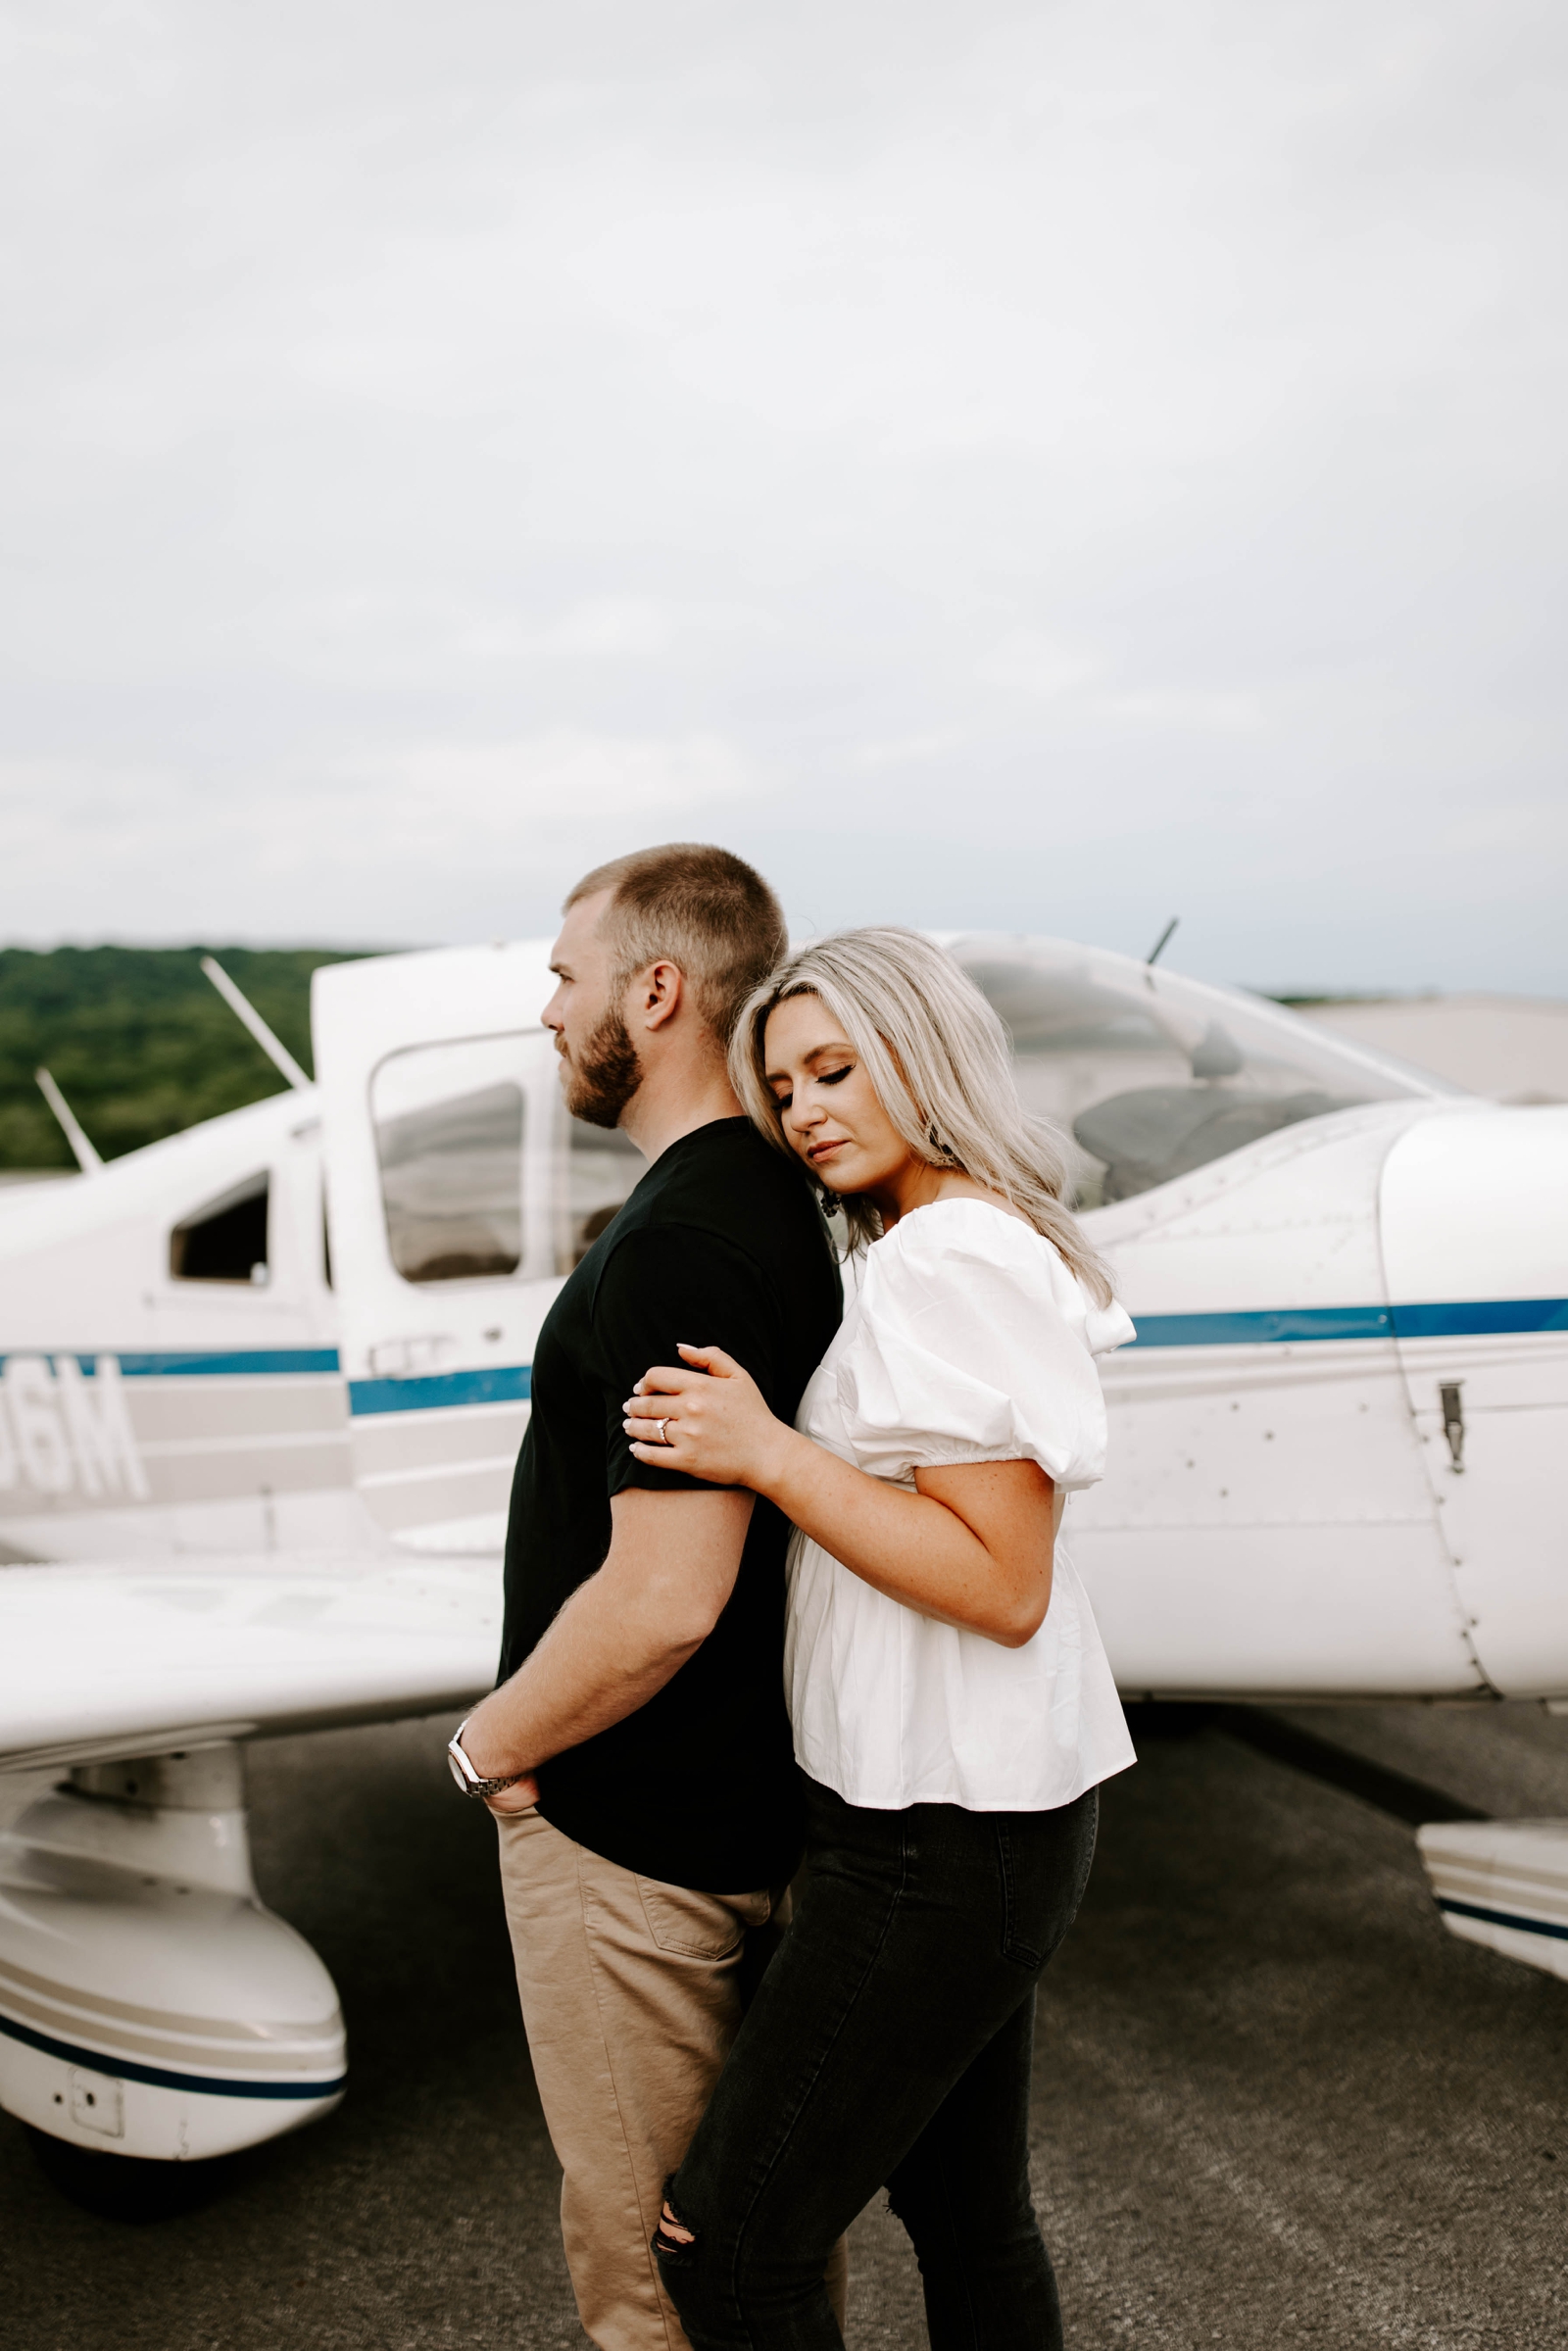 airplane theme engagement session by Rachel Wehan Photography